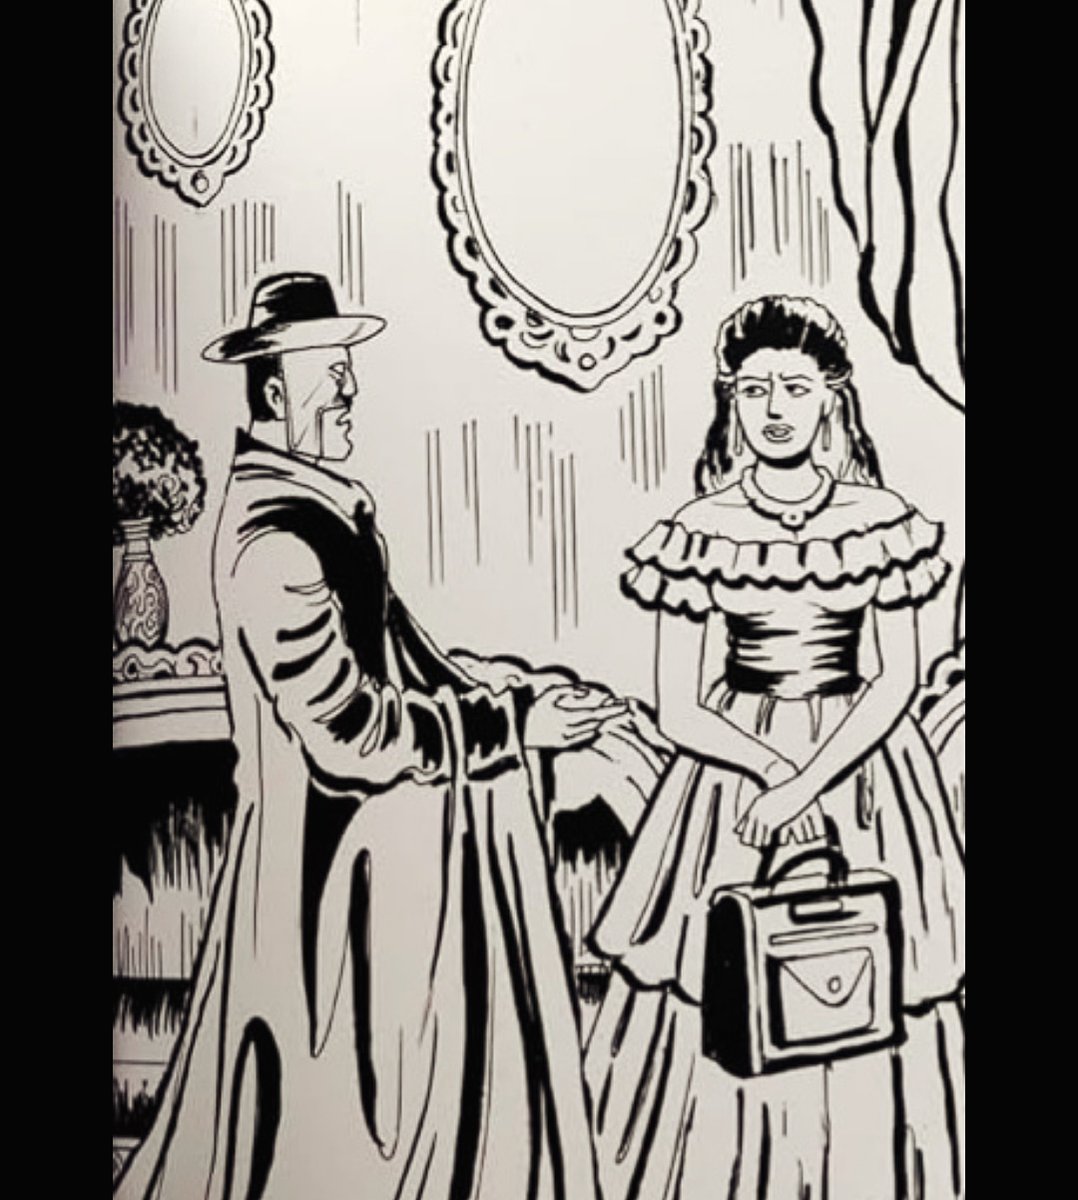 Illustration from 'The Phantom of the Opera for Kids : Illustrated Abridged Children Classic'
#thephantomoftheopera #phantomoftheopera